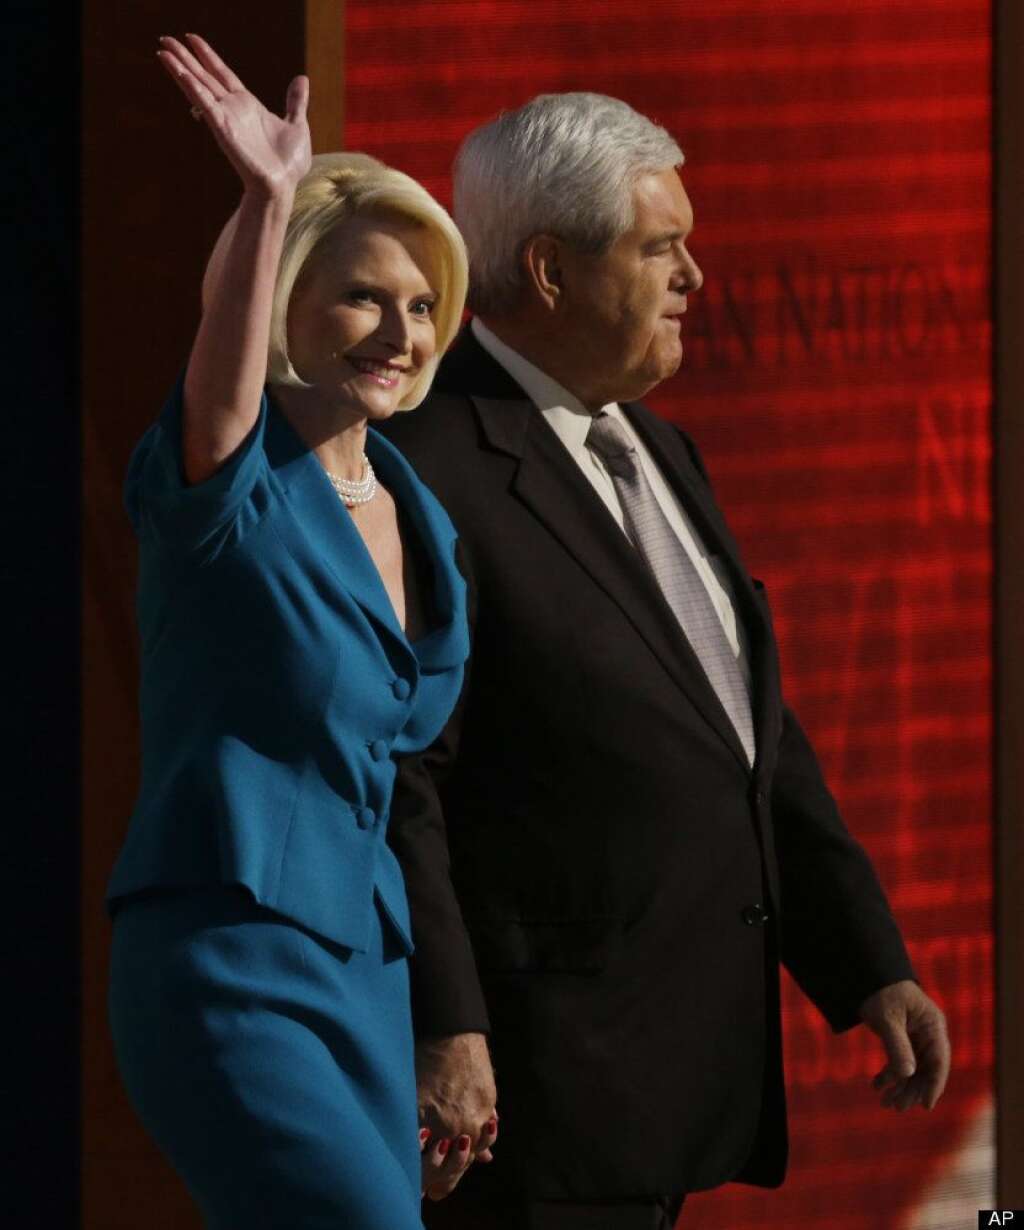 Former House Speaker Newt Gingrich and his wife Callista walk onto the stage to speak to delegates during the Republican National Convention in Tampa, Fla., on Thursday, Aug. 30, 2012. (AP Photo/Charlie Neibergall)